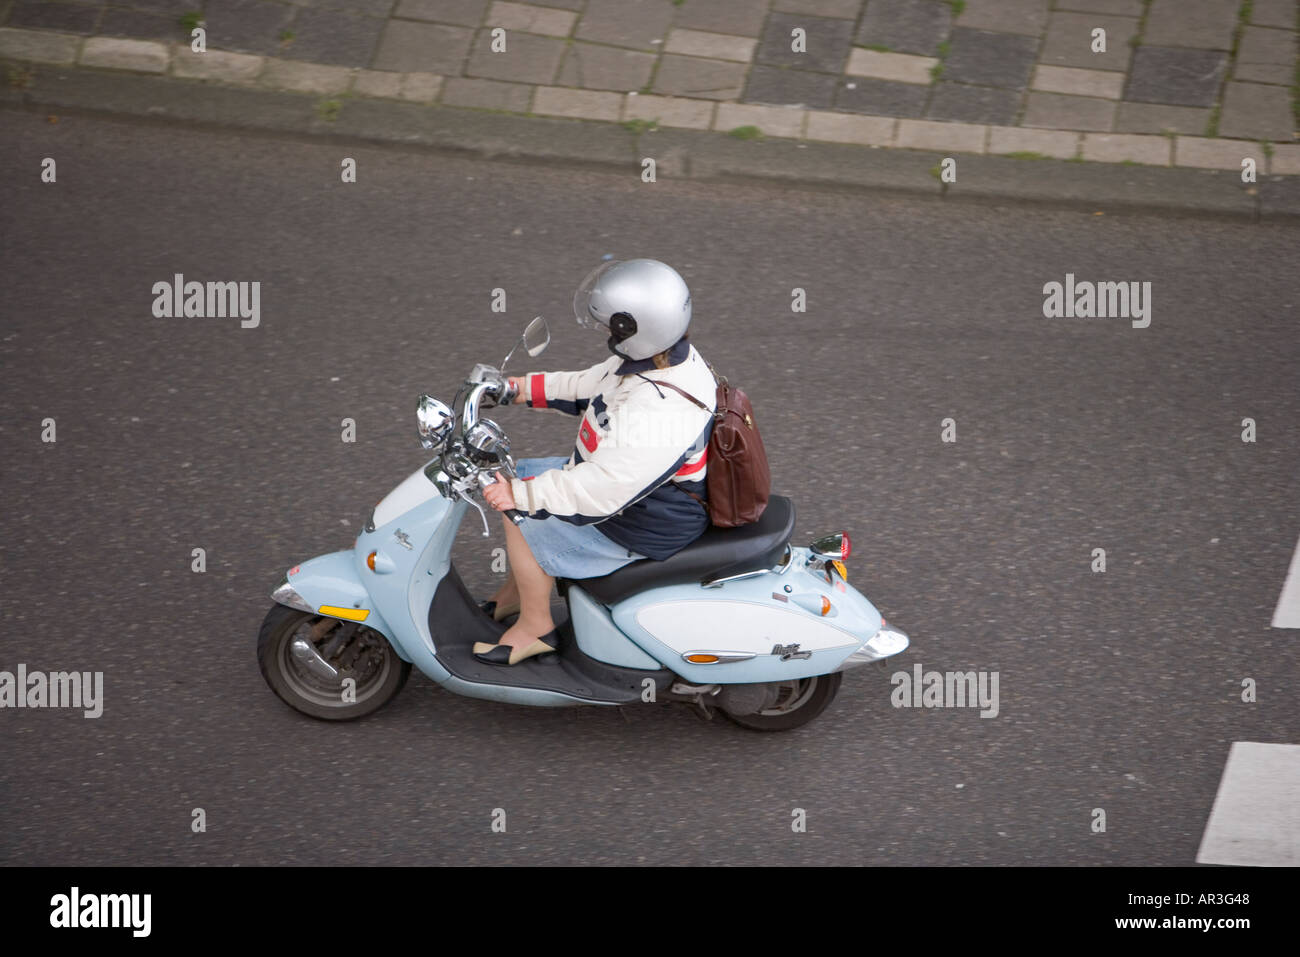 Aprilia Scooter High Resolution Stock Photography and Images - Alamy